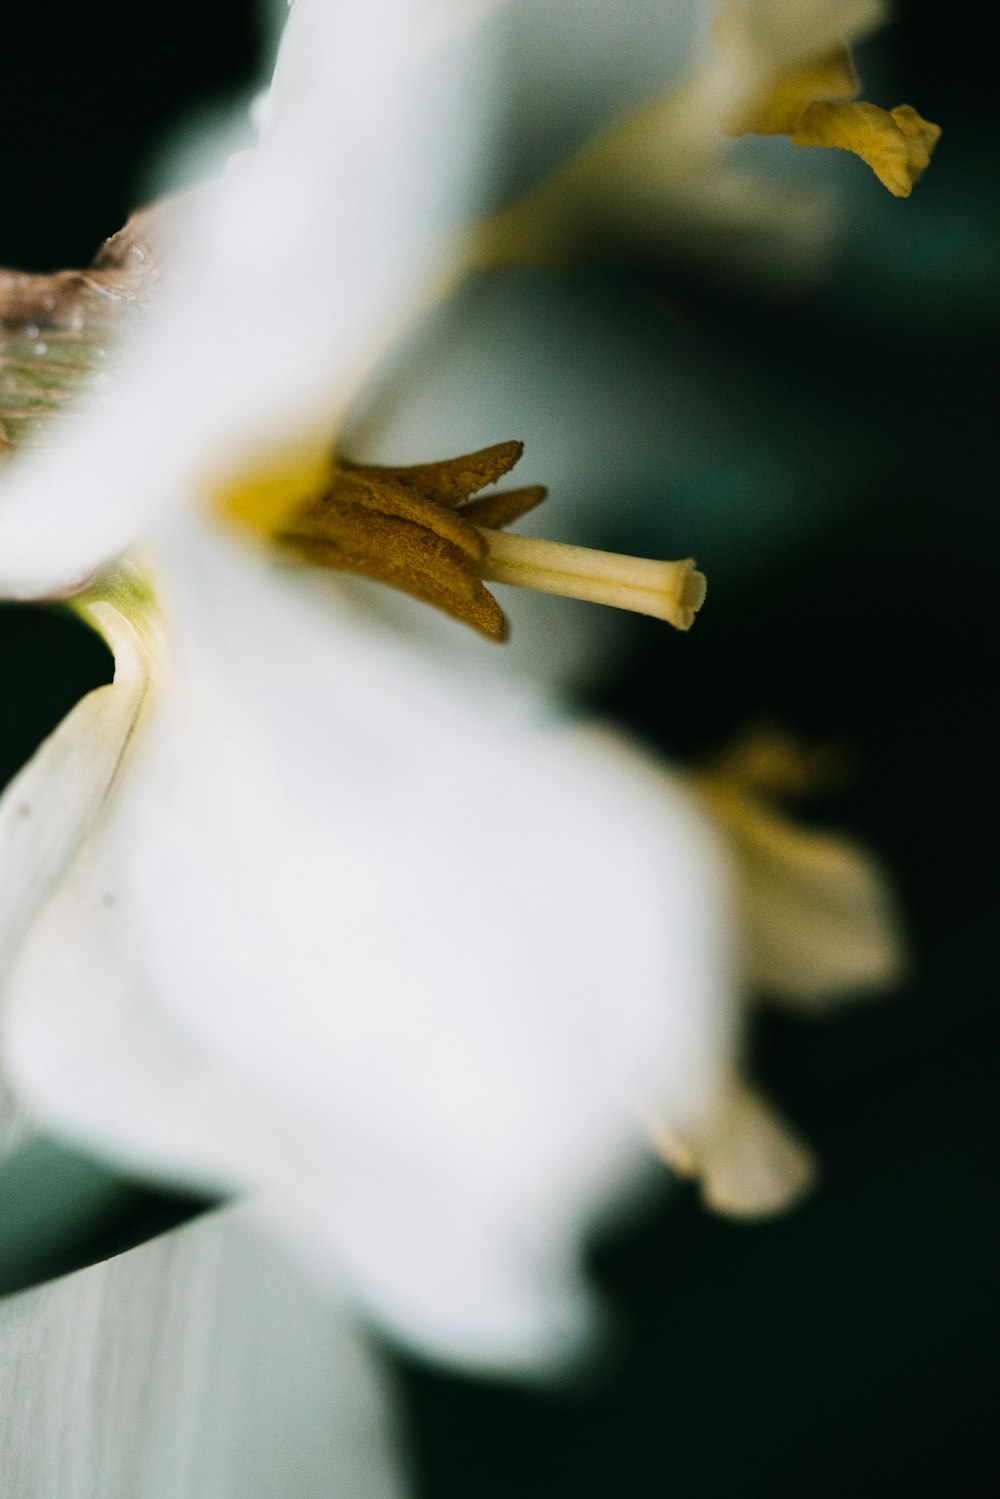 a close up of a white flower with yellow stamen